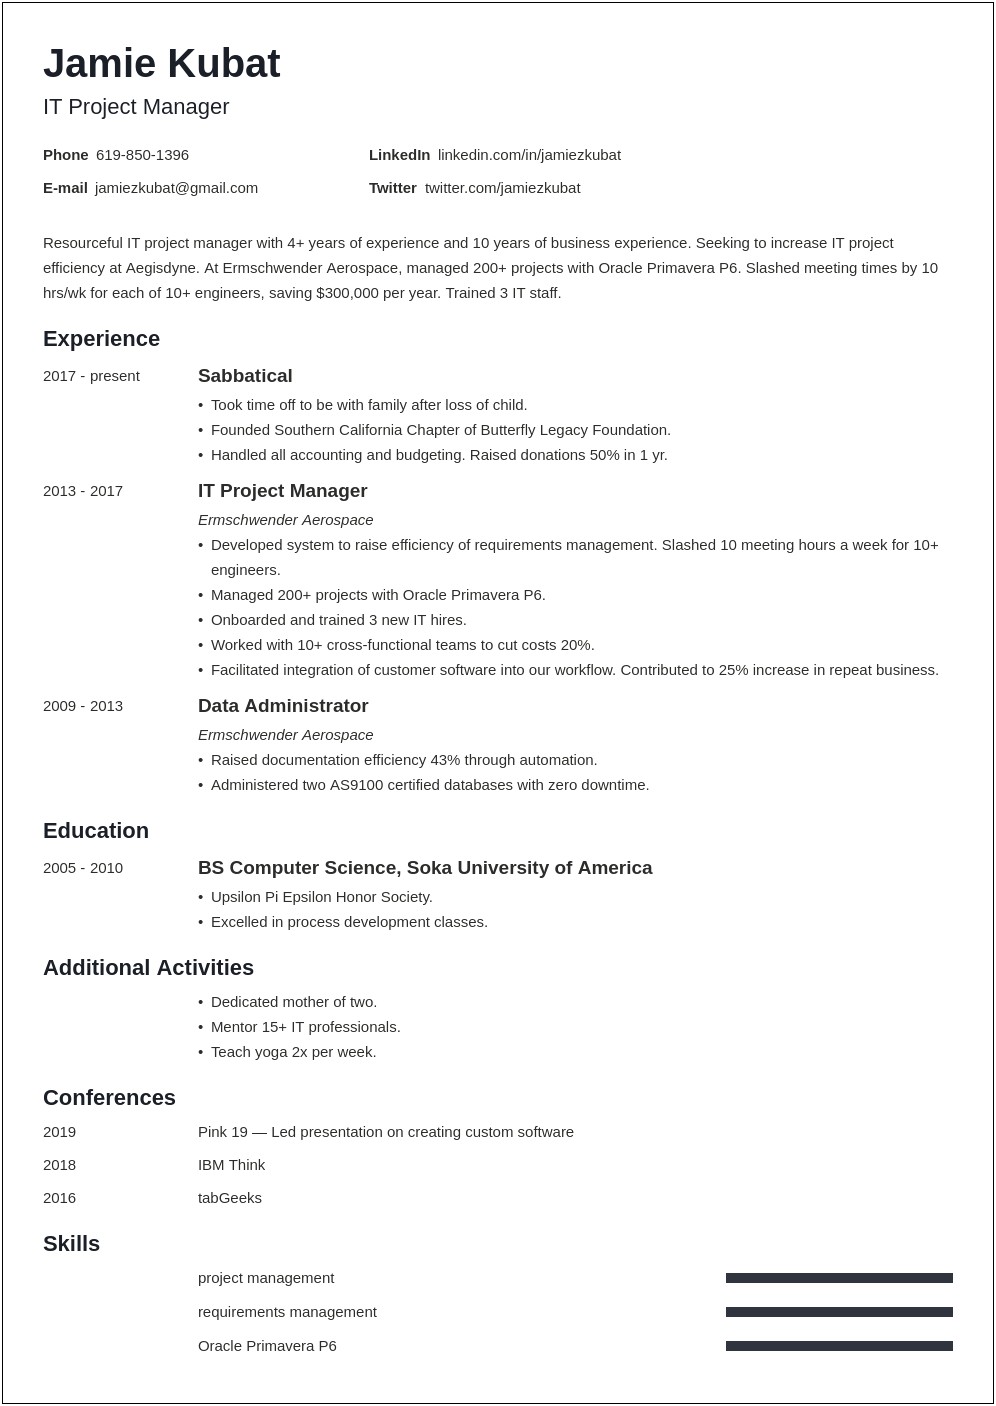 An Education Gap In The Resume Example